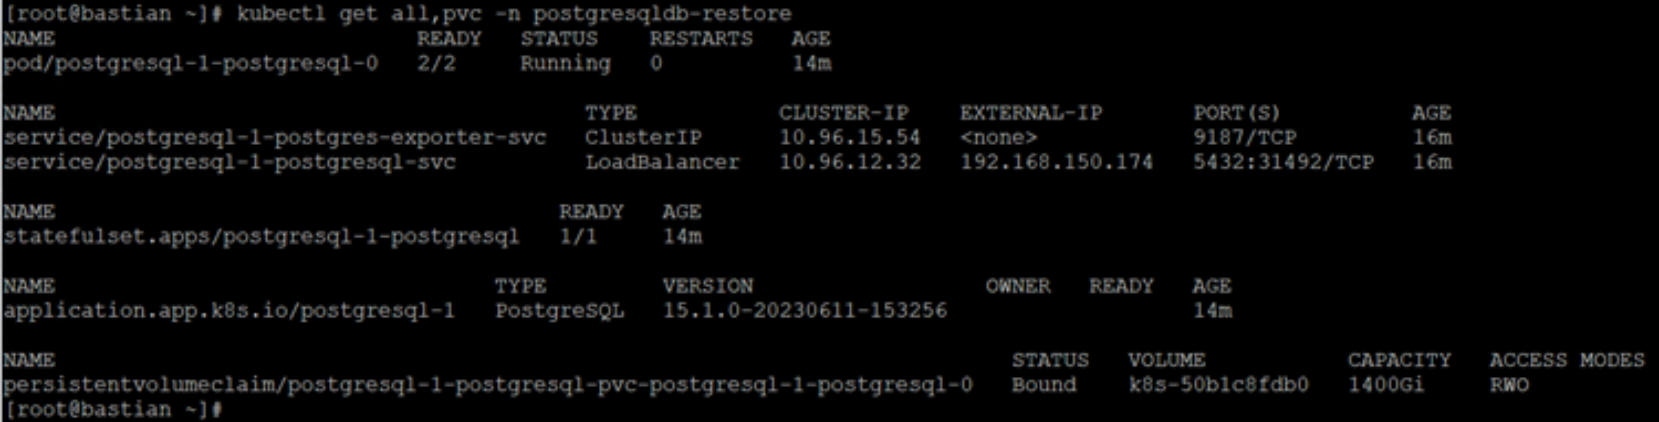 This figure shows that the PostgreSQL application pod has been successfully restored to the new namespace postgresqldb-restore.